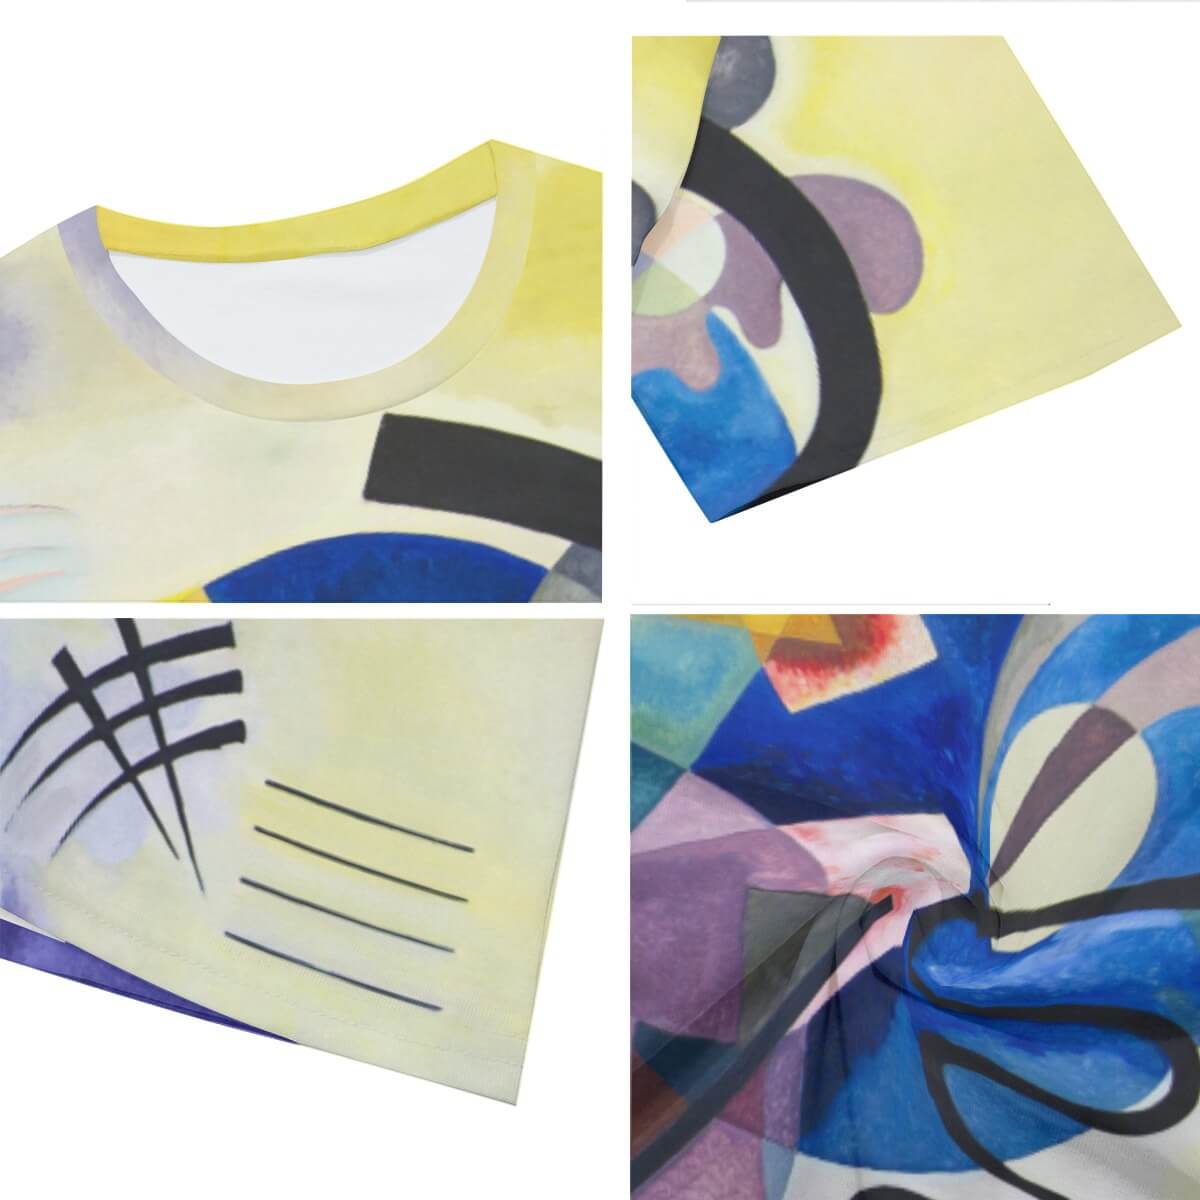 Artistic Expressionist Clothing